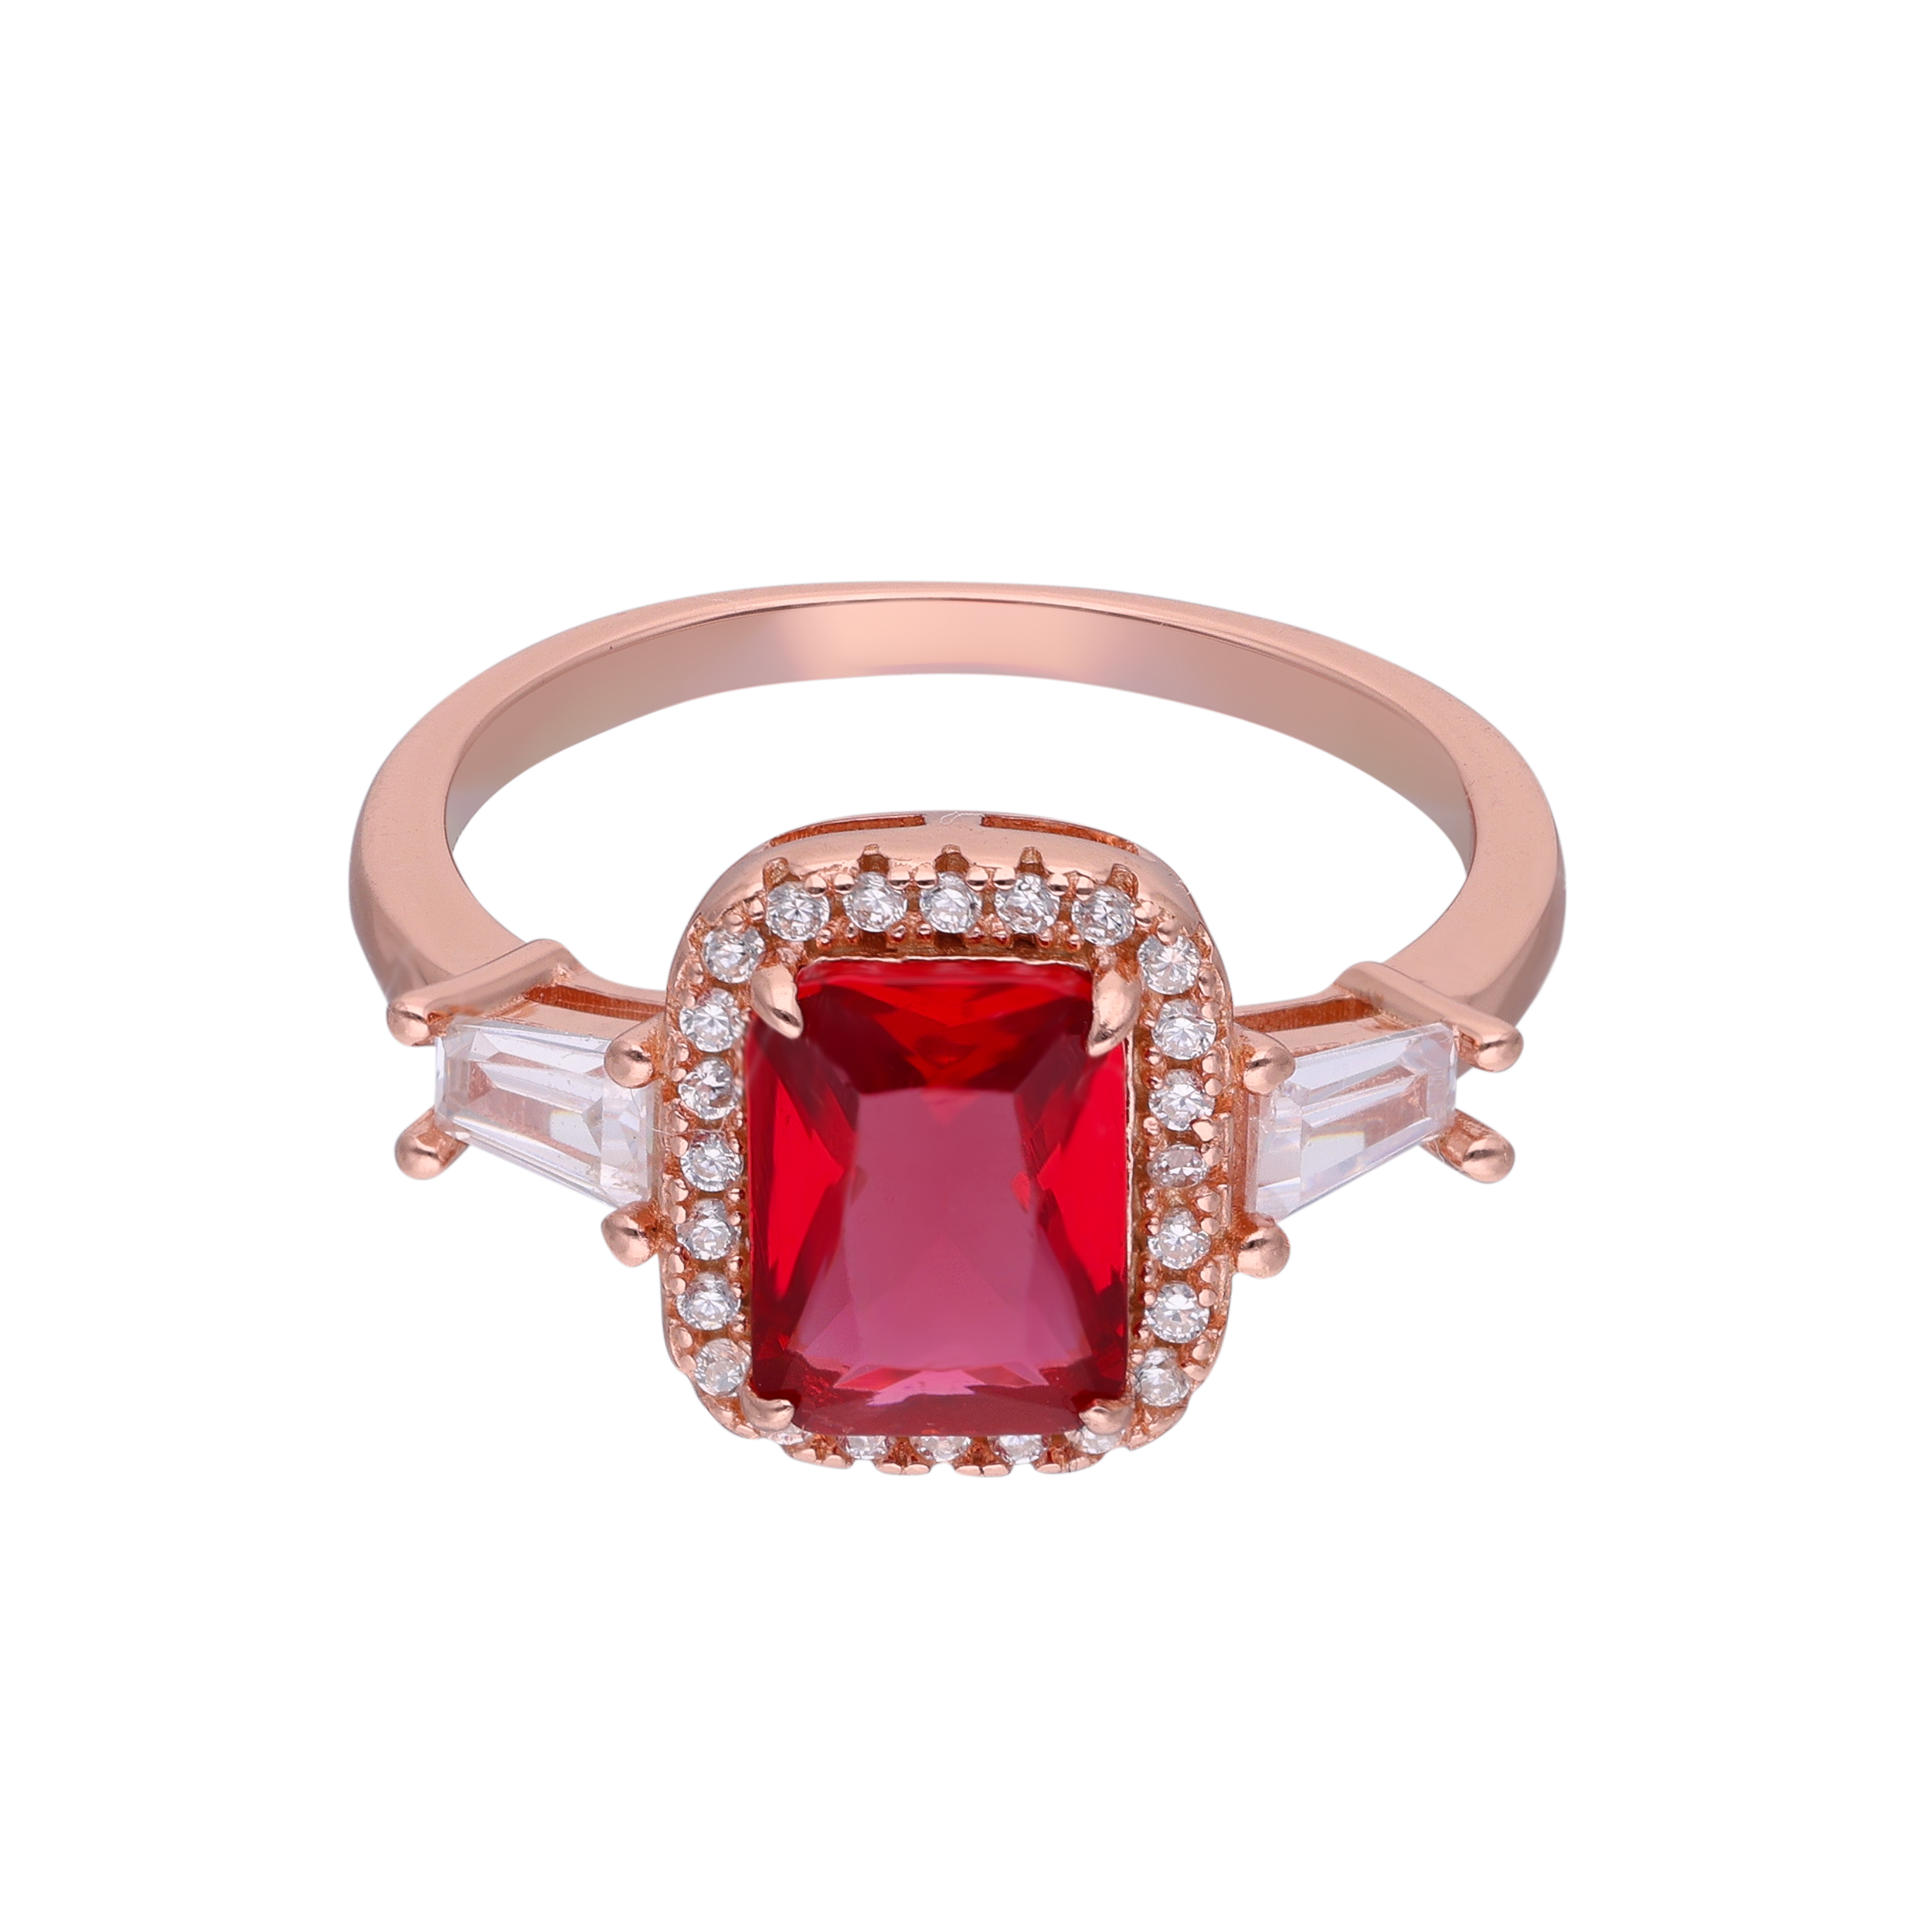 Red Stone Silver Ring | SKU: 0019211794